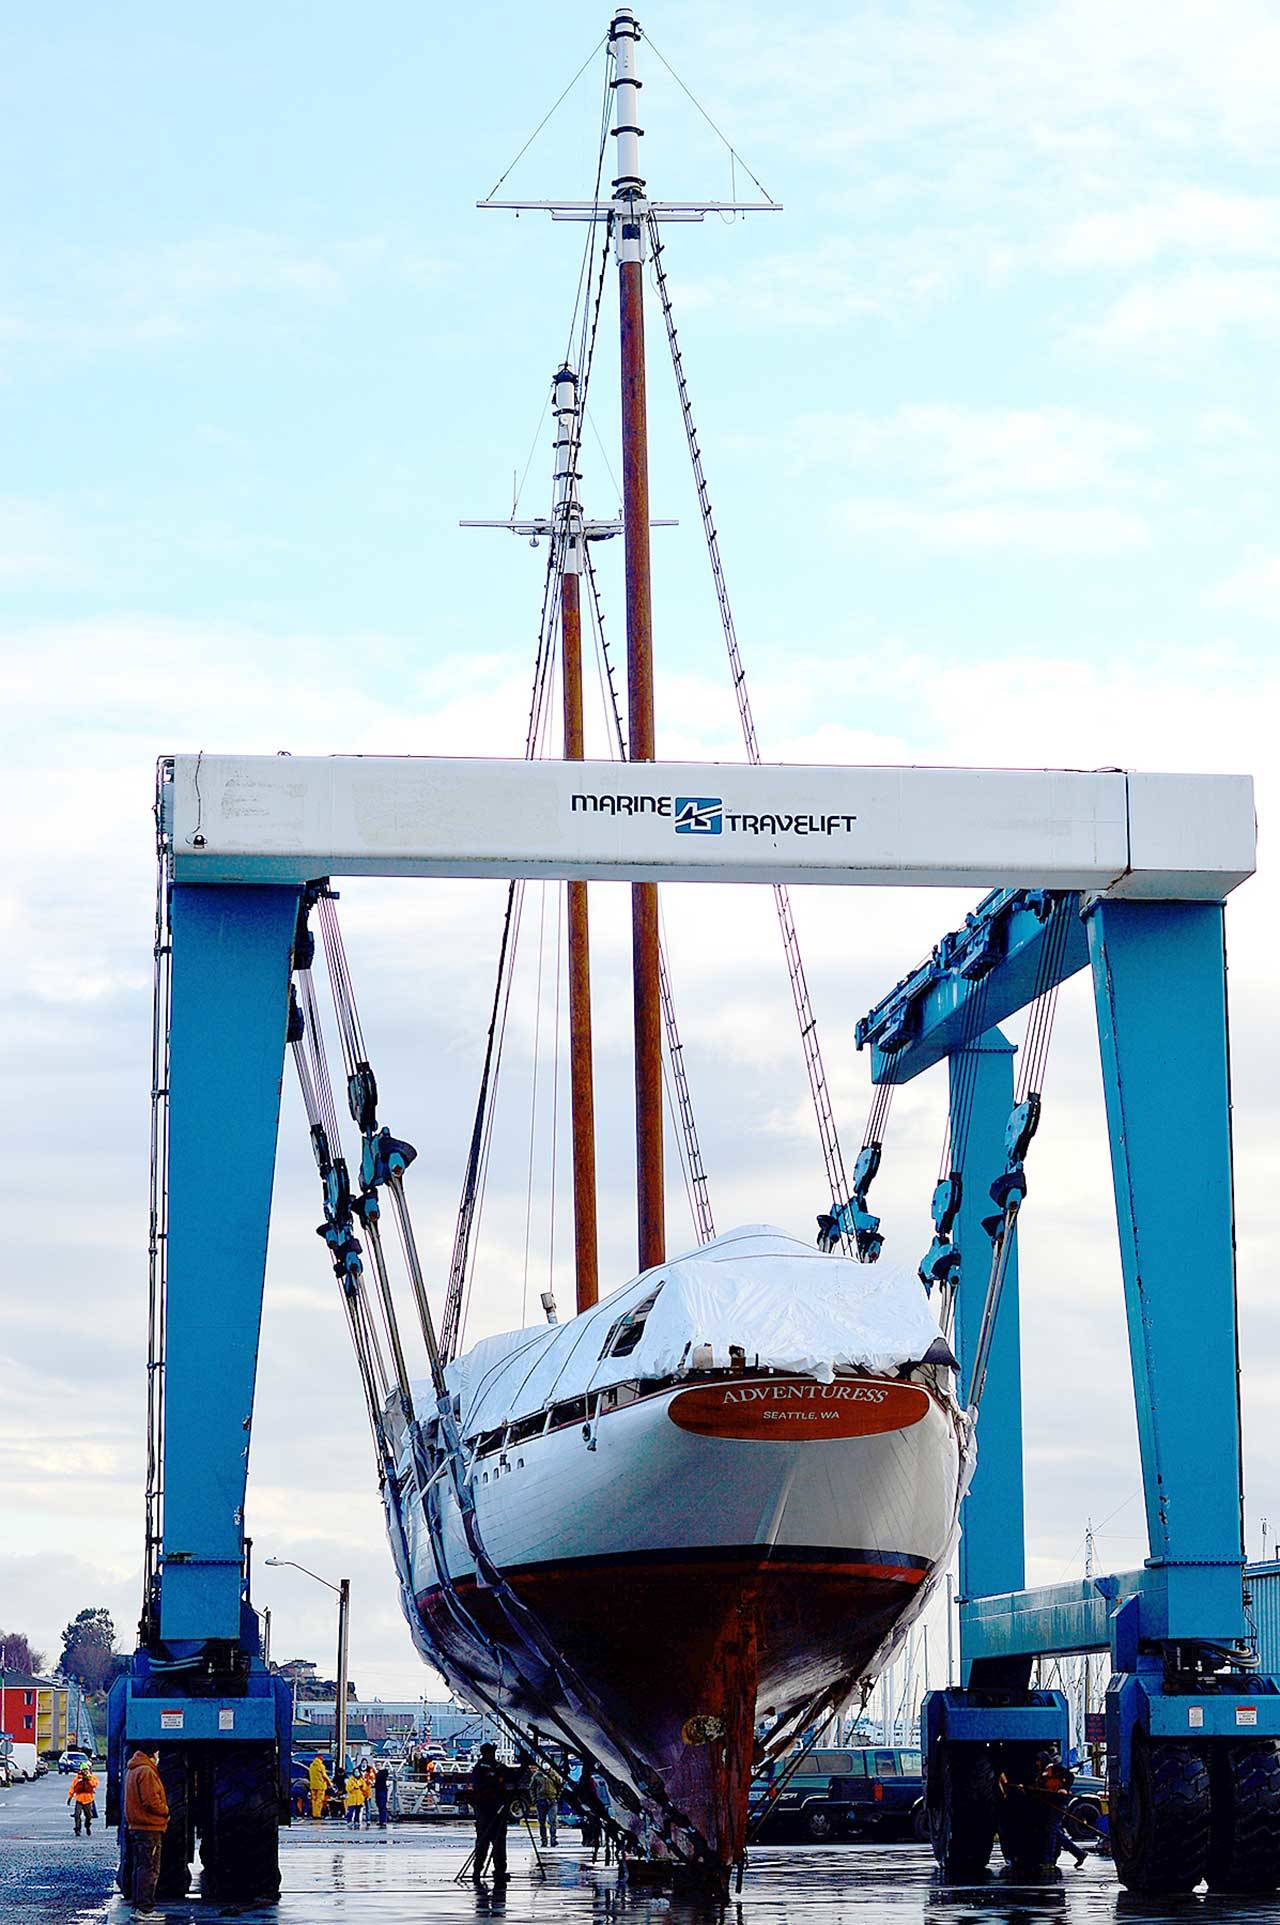 The Adventuress, a 108-year-old National Historic Landmark and nonprofit educational ship, was lifted into the Port Townsend Boat Haven on Monday morning. The schooner will receive her routine Coast Guard hull inspection and have her bottom painted. (Diane Urbani de la Paz/Peninsula Daily News)